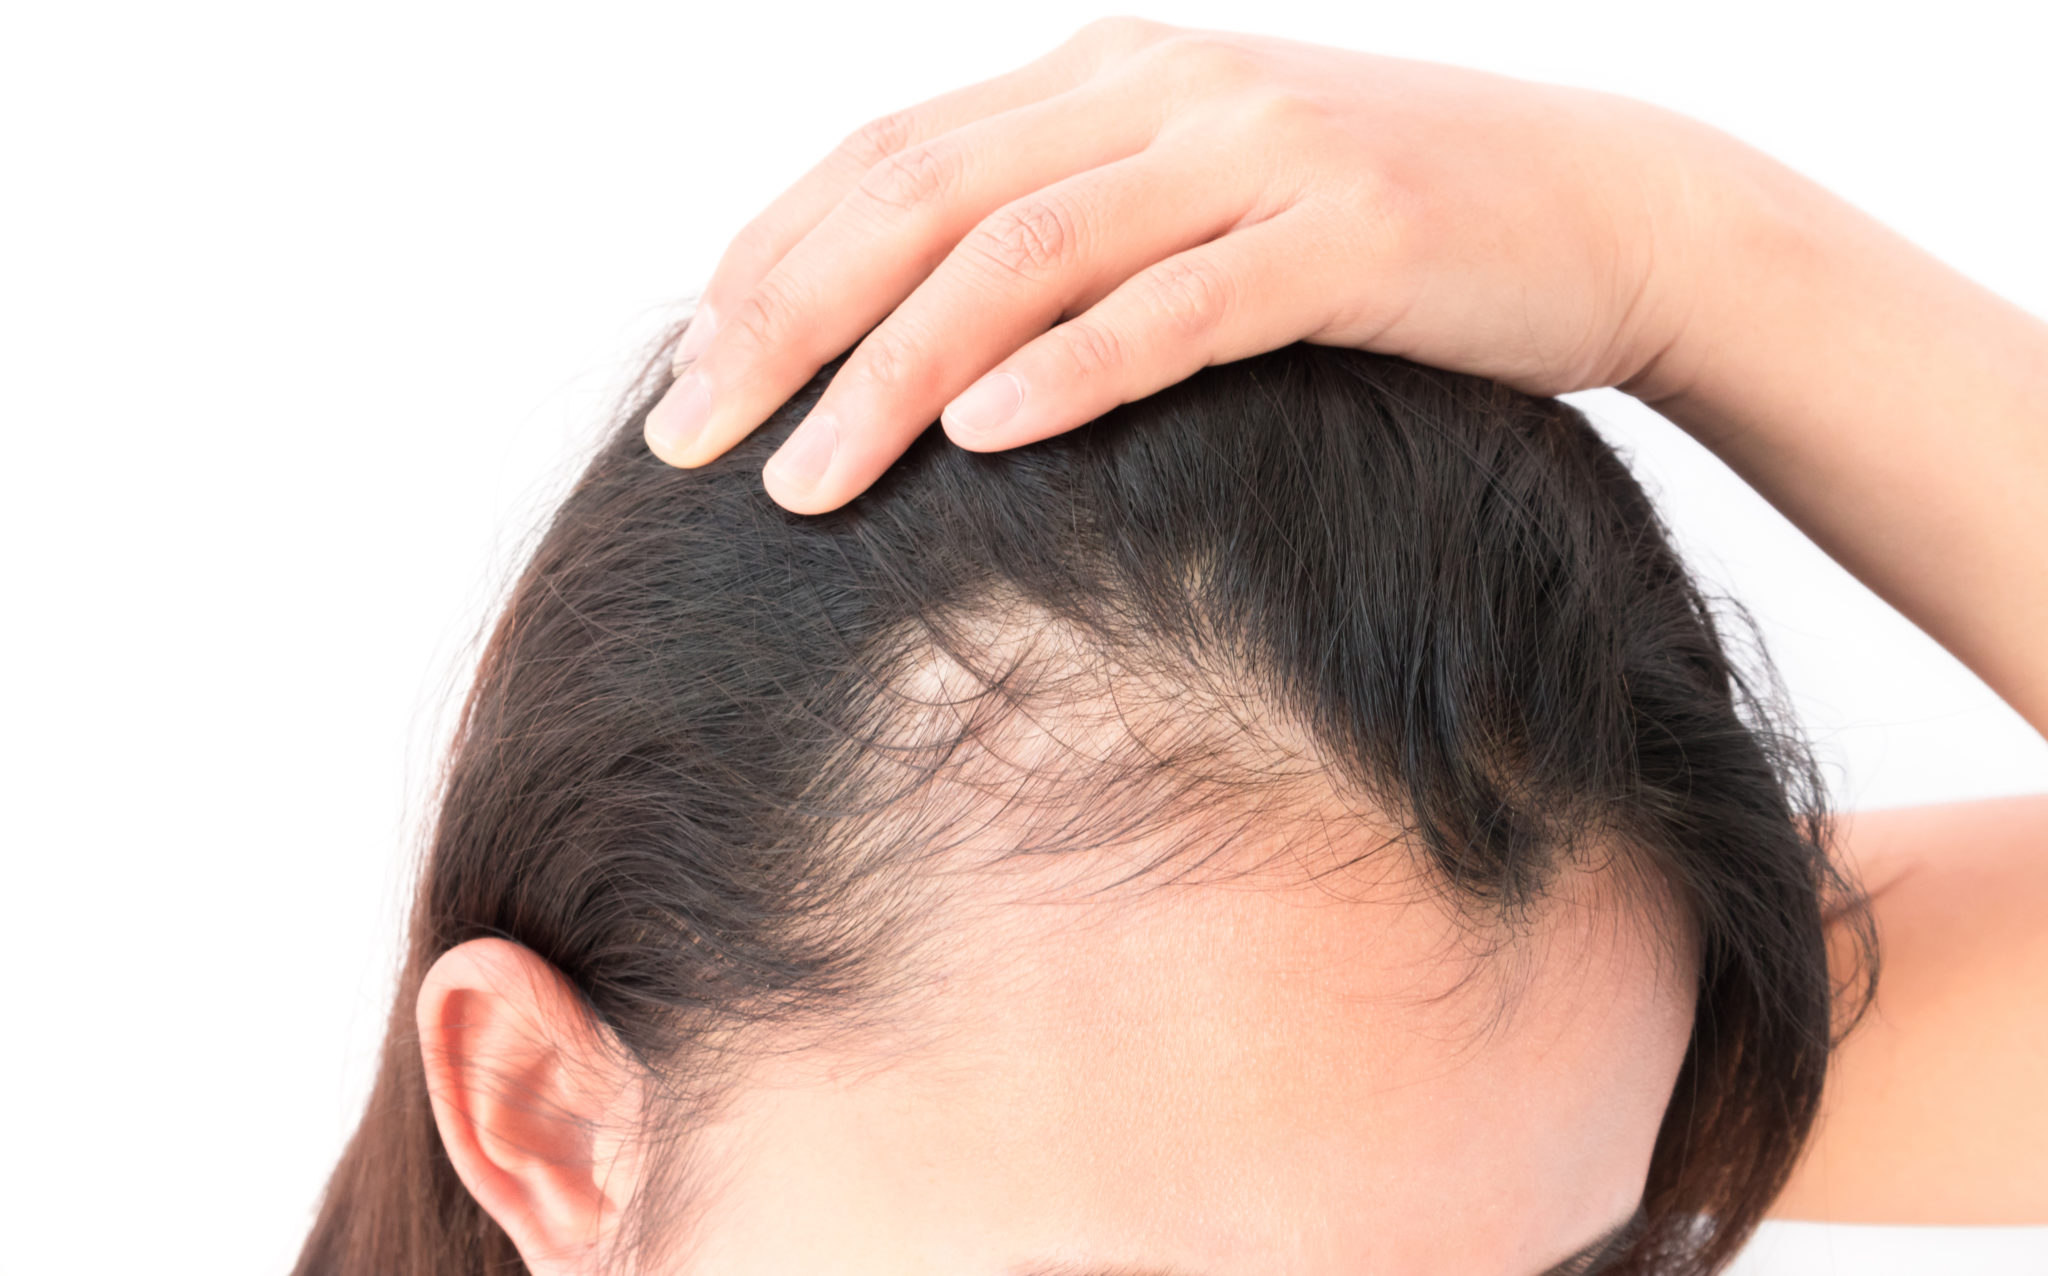 Stress Cause Hair Loss Secure Payment, 64% OFF 